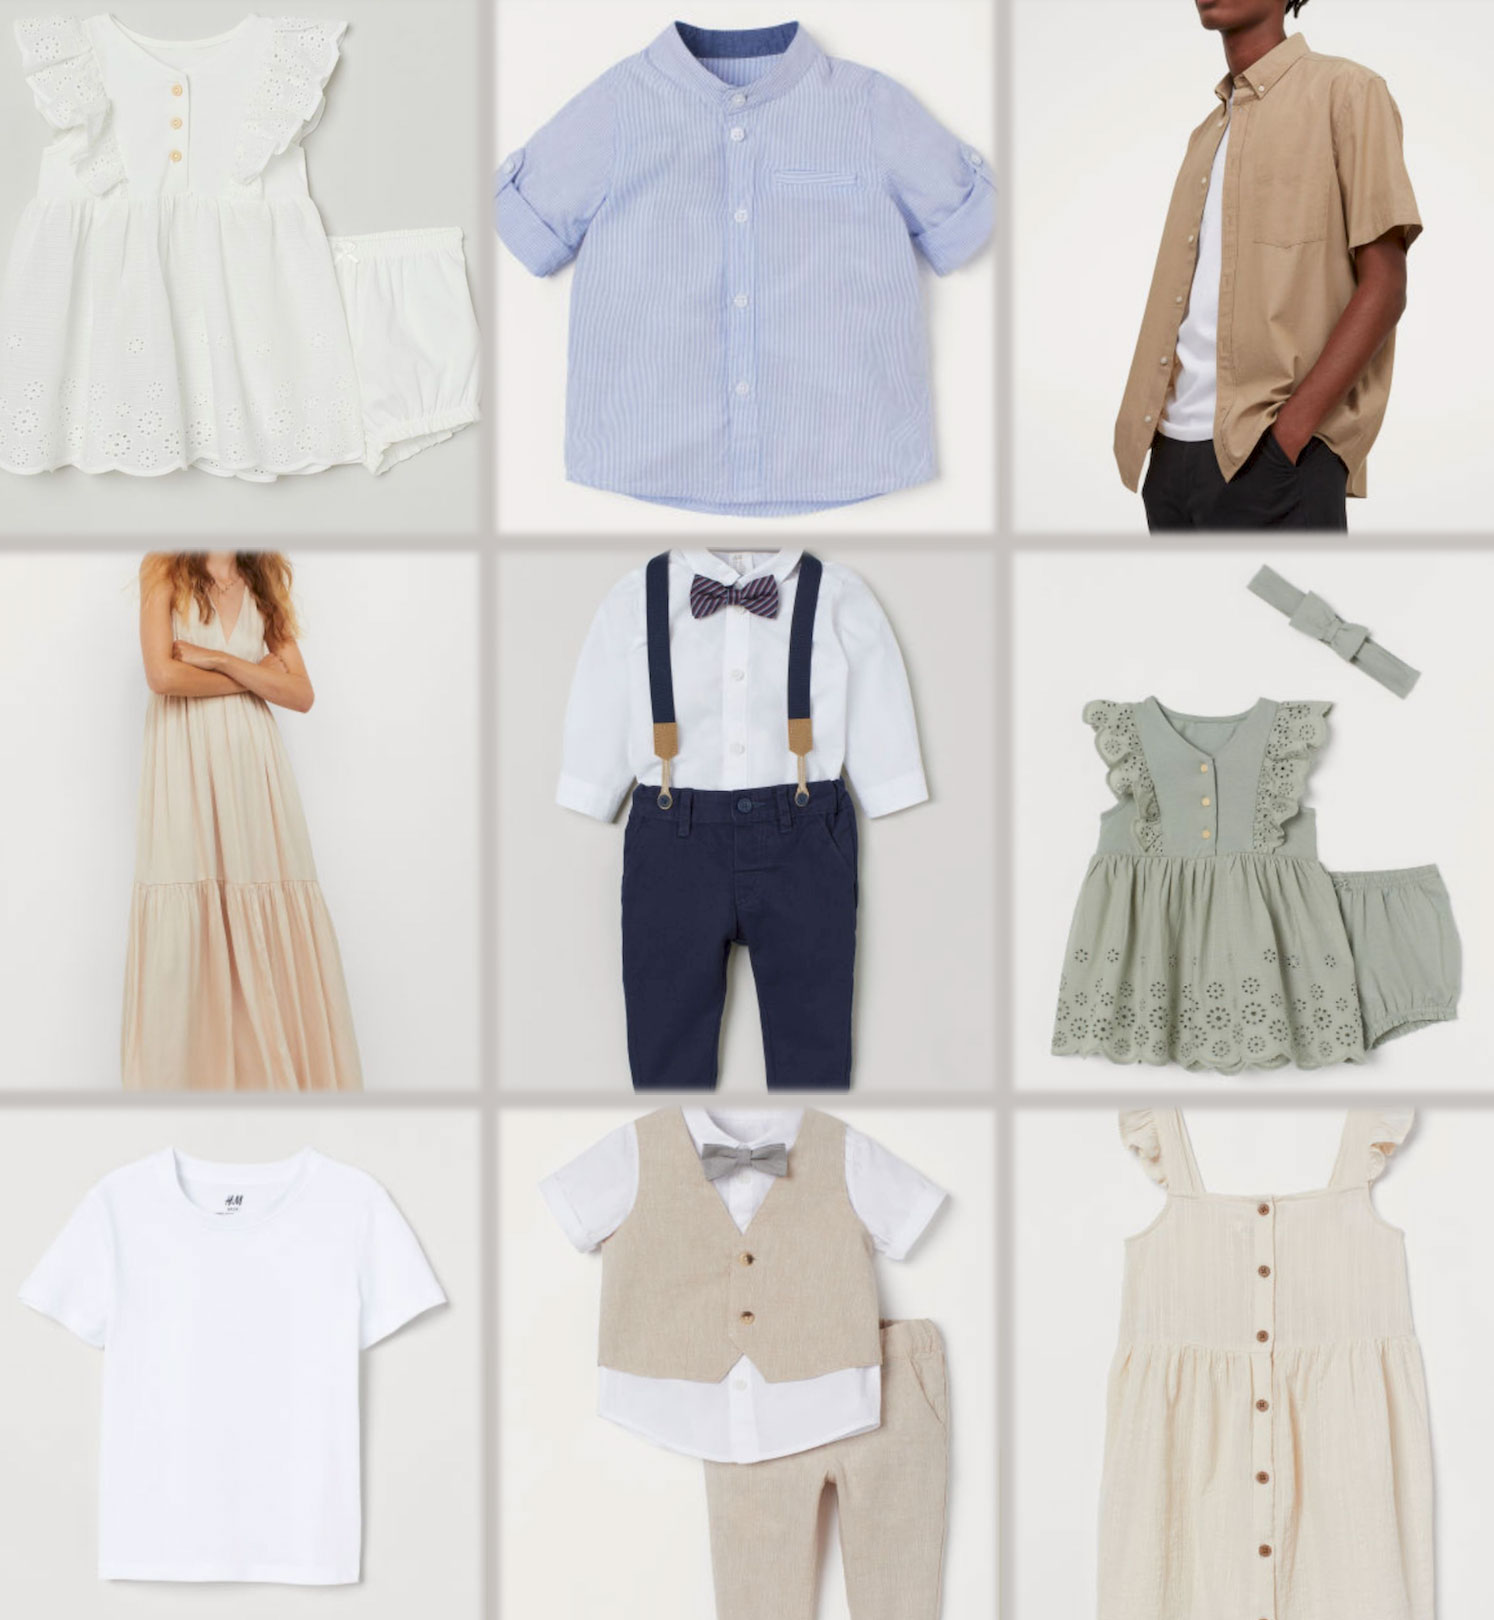 suggested outfits for your lavender field photoshoot